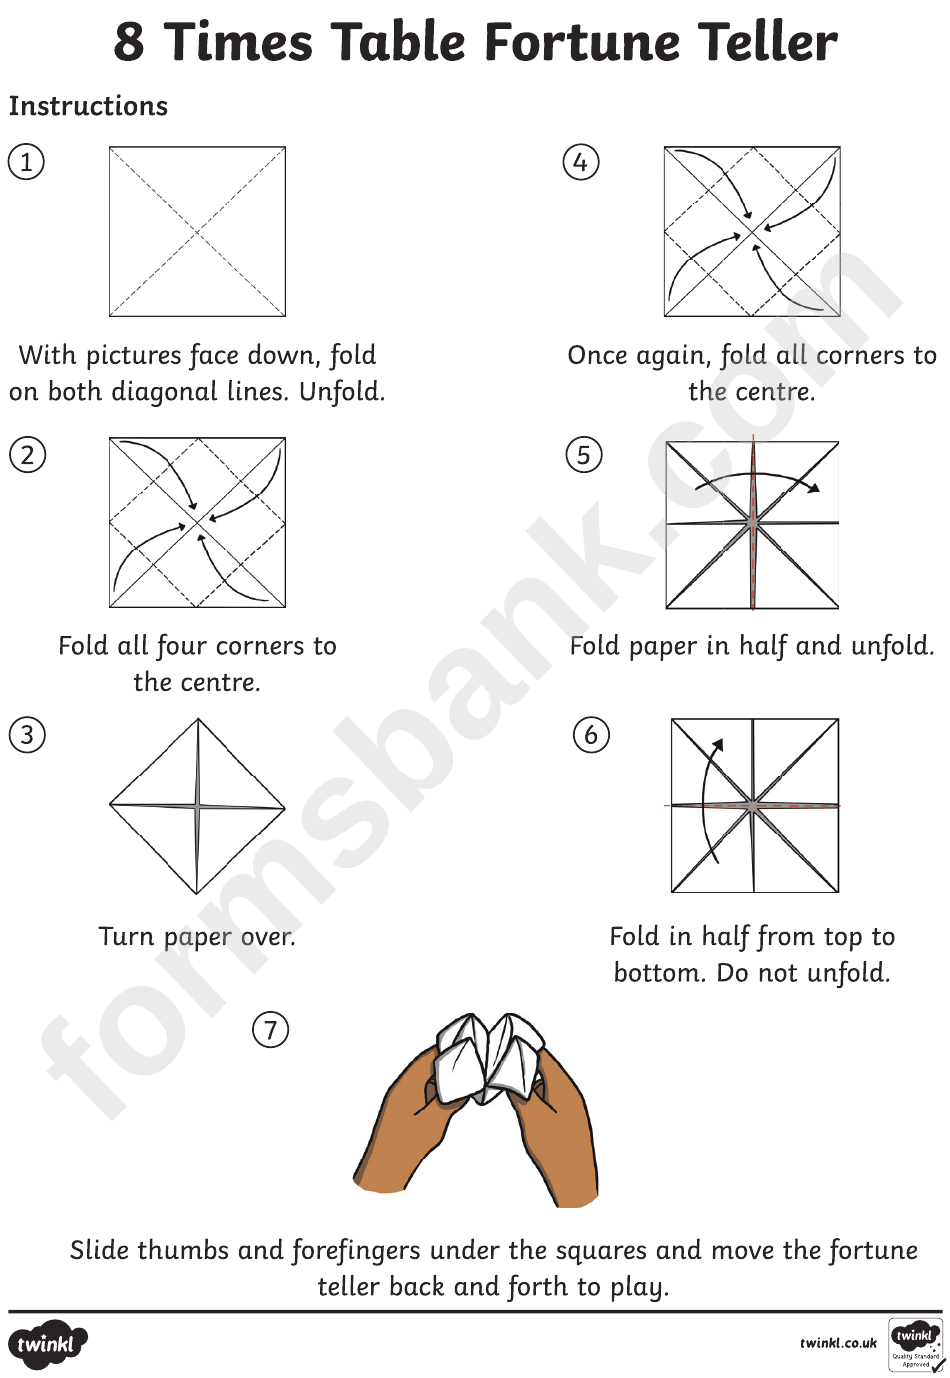 8 Times Table Fortune Teller Template